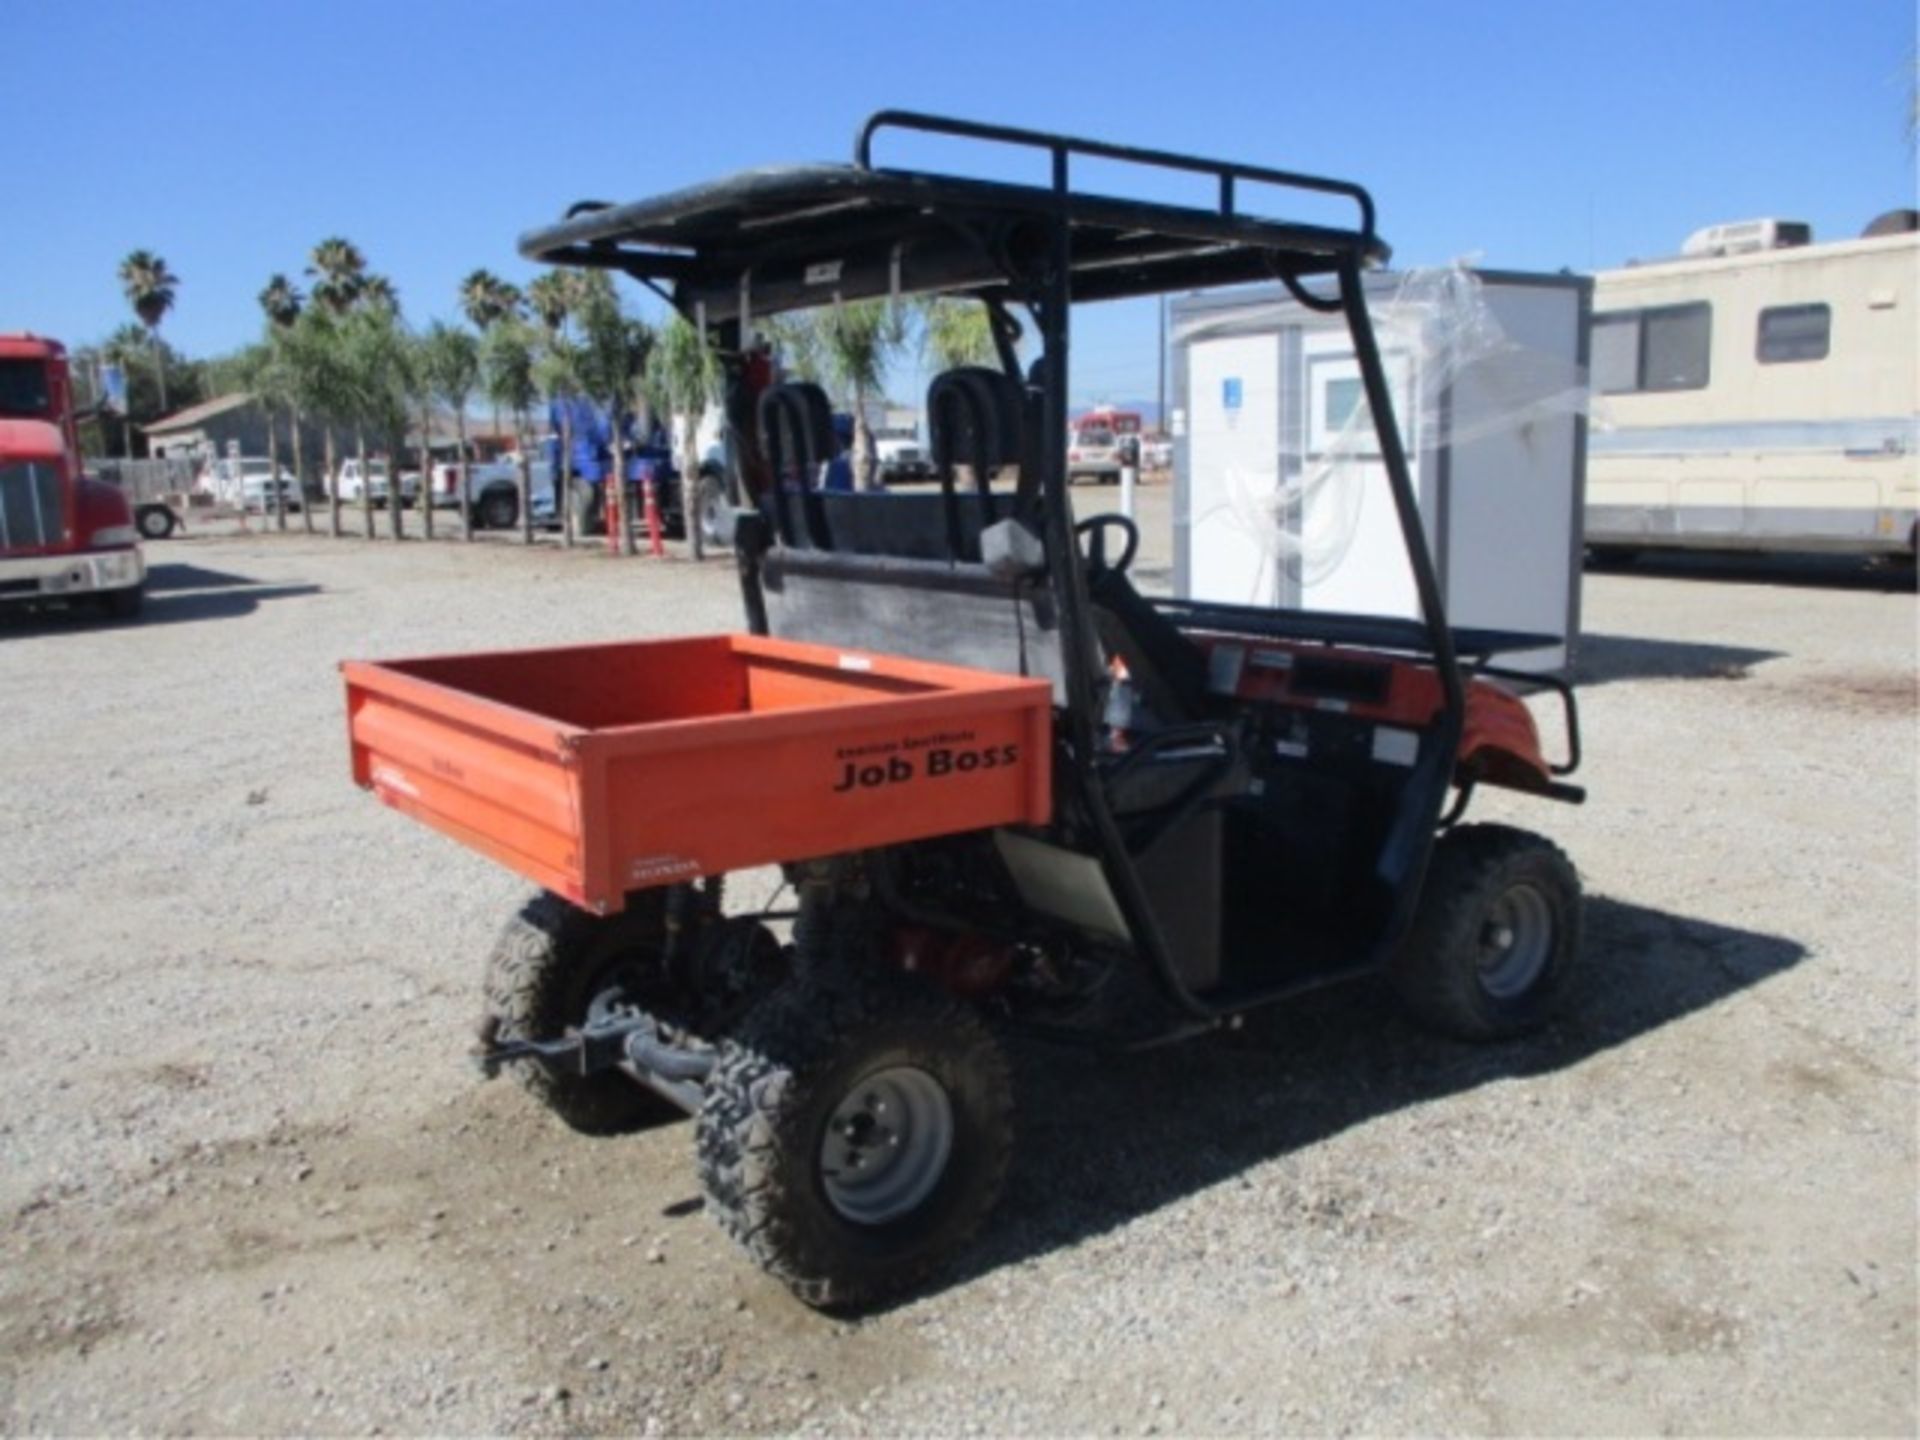 2008 American Sportworks Job Boss Utility Cart, Honda Gas, Rear Metal Dump Bed, Canopy, Tow Hitch, - Image 14 of 50